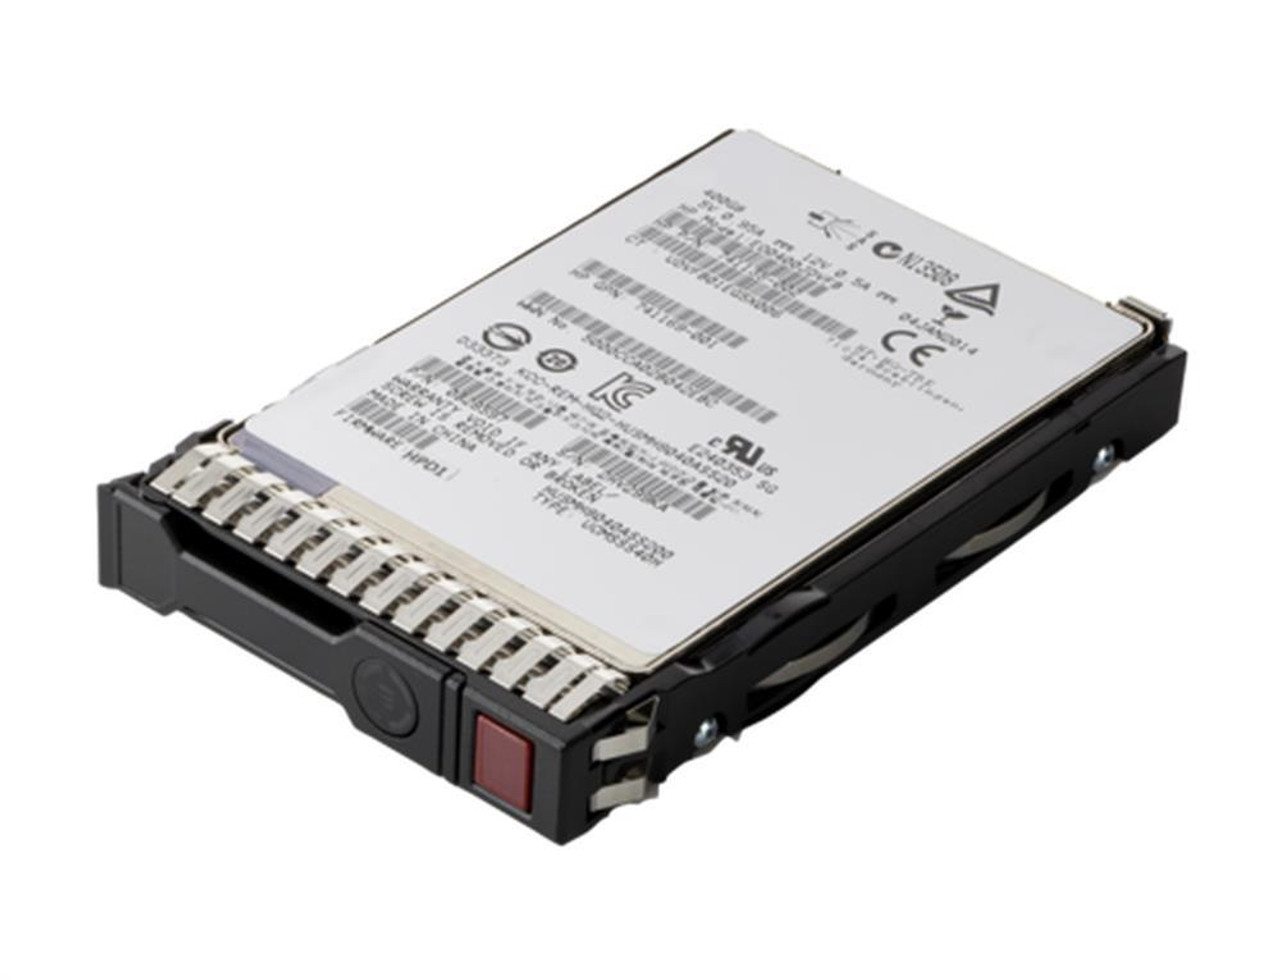 875511-K21#0D1 HPE 960GB SATA 6Gbps Read Intensive 2.5-inch Internal Solid State Drive (SSD) with Smart Carrier